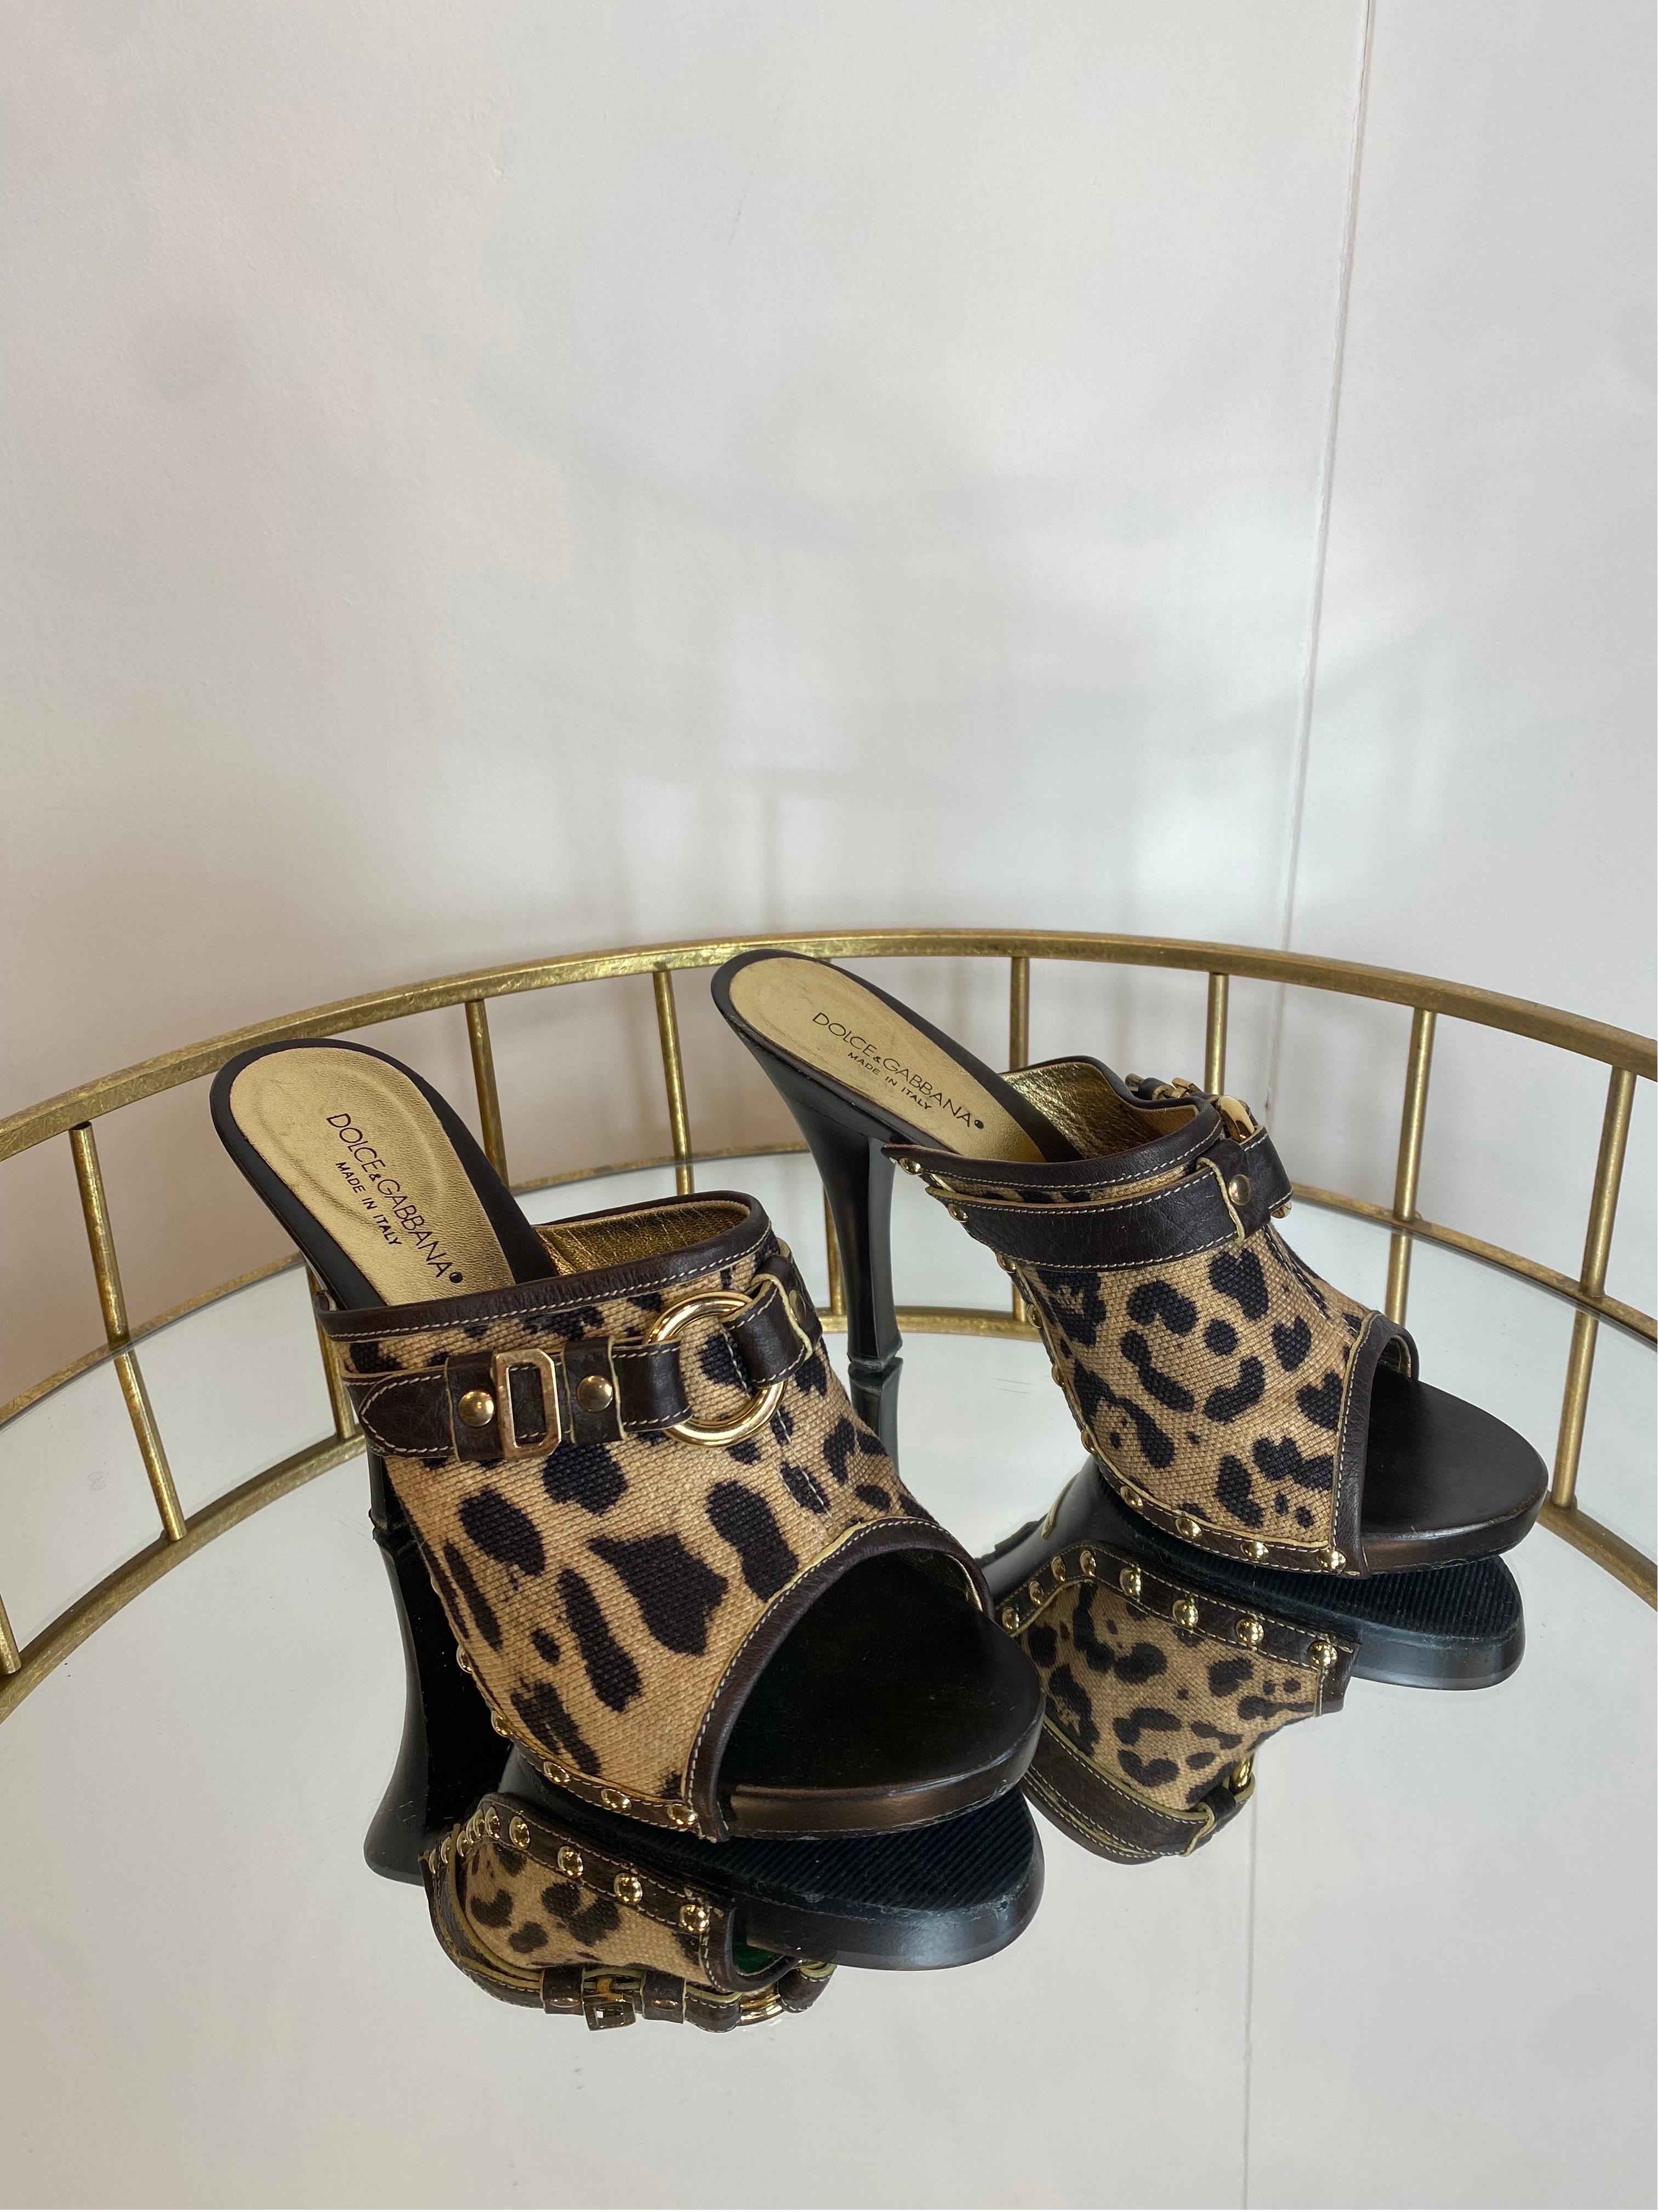 Dolce and Gabbana clogs
In leopard print fabric and golden hardware.
Italian number 38.
Inner sole 24.5
Heel 12 cm
Excellent general condition, used only for a photo shoot.
They have original box.